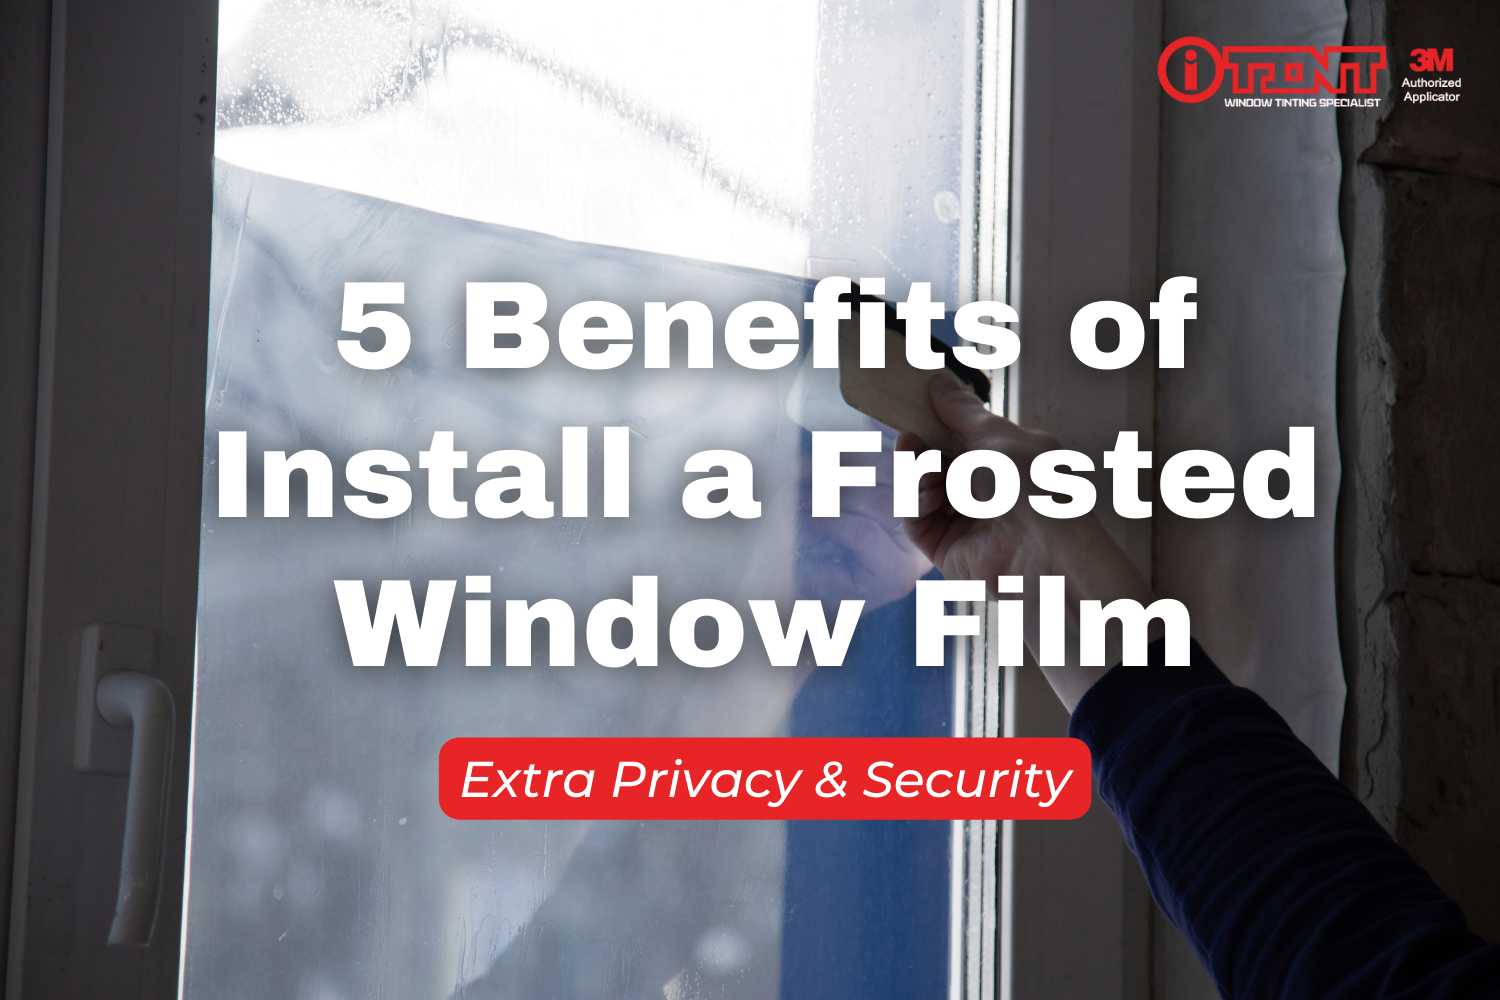 5 Benefits of Install a Frosted Window Film